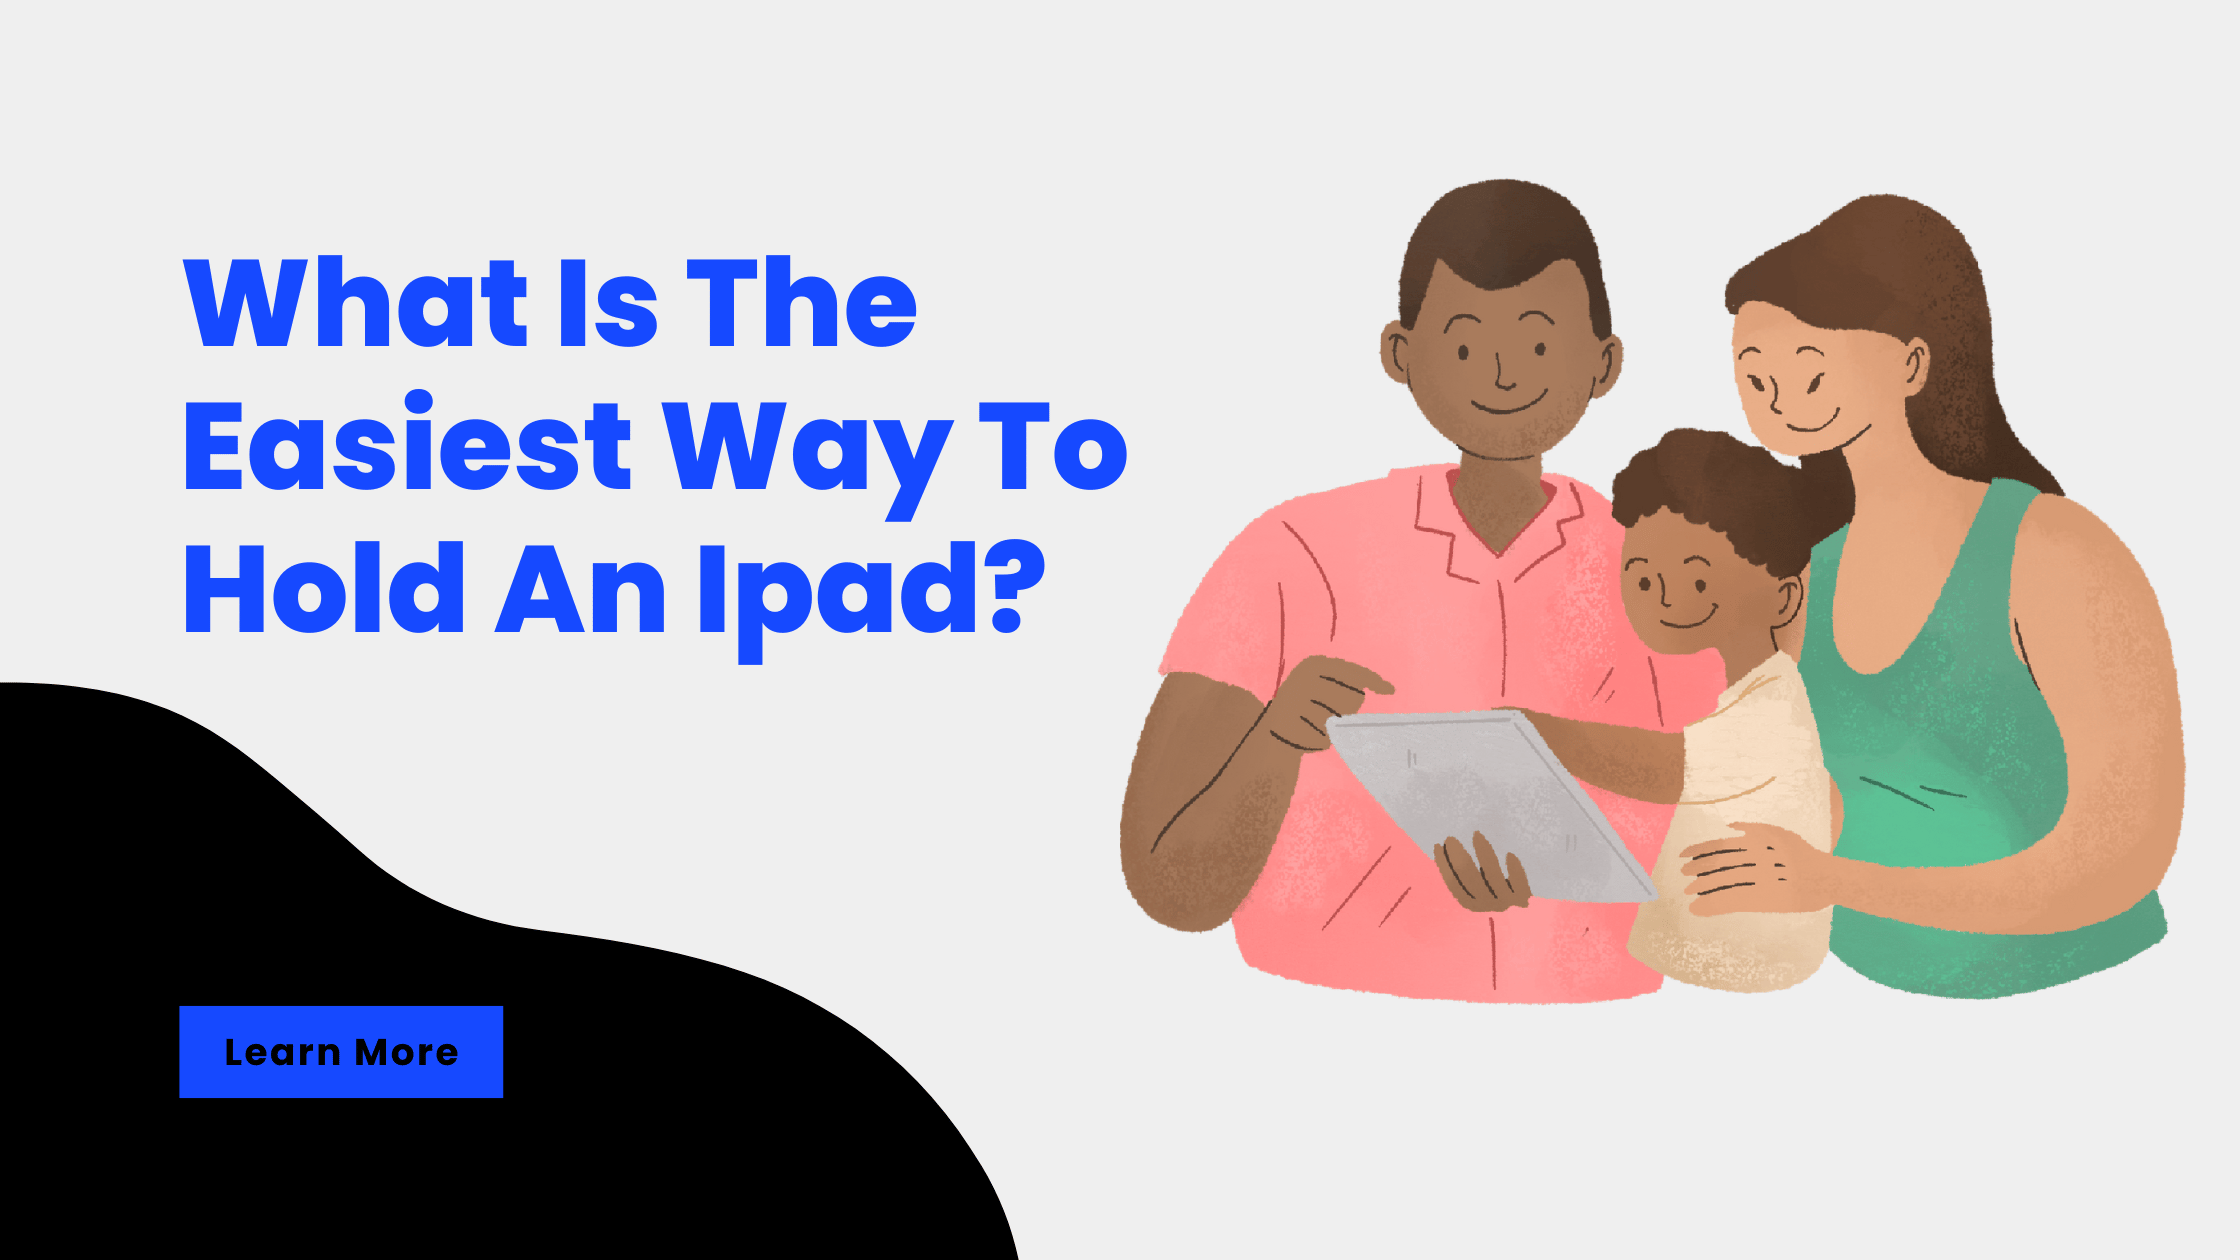 What Is The Easiest Way To Hold An Ipad?